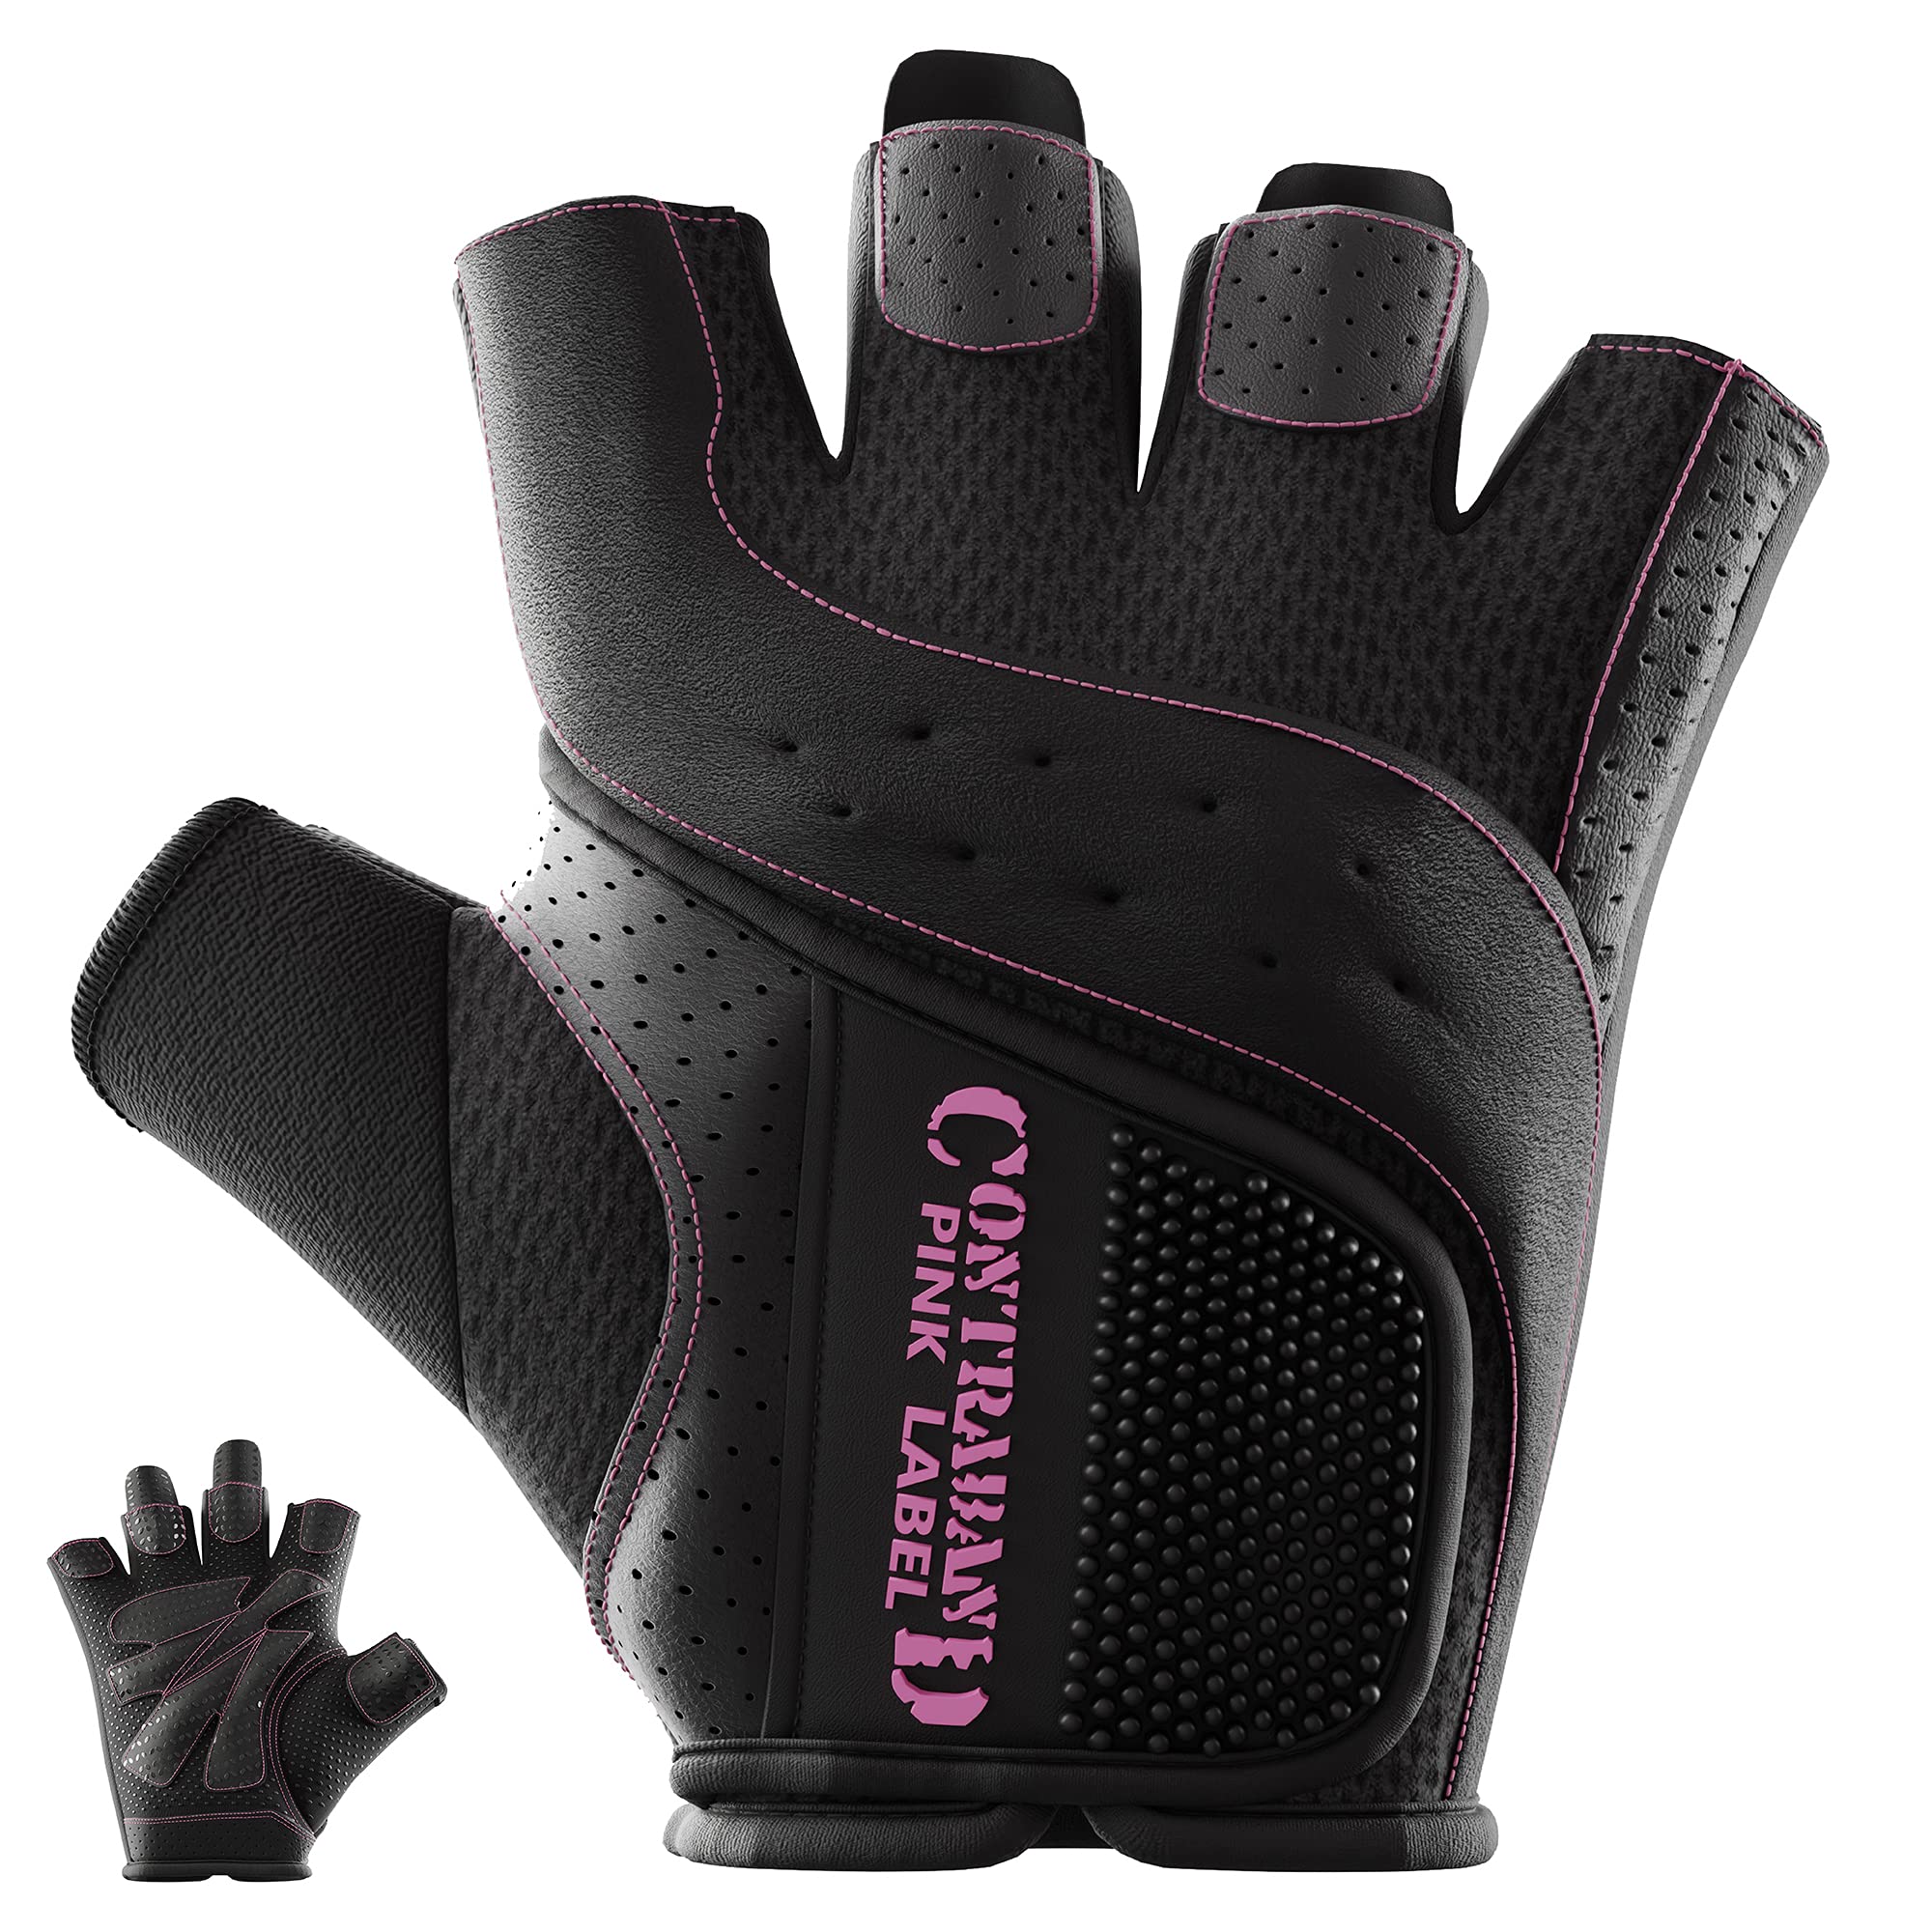 Contraband Pink Label 5137 Women's Padded Weight Lifting and Rowing Gloves  w/ Grip-Lock Padding (Pair) - Machine Washable Fingerless Workout Gloves  Designed Specifically for Women Black Medium